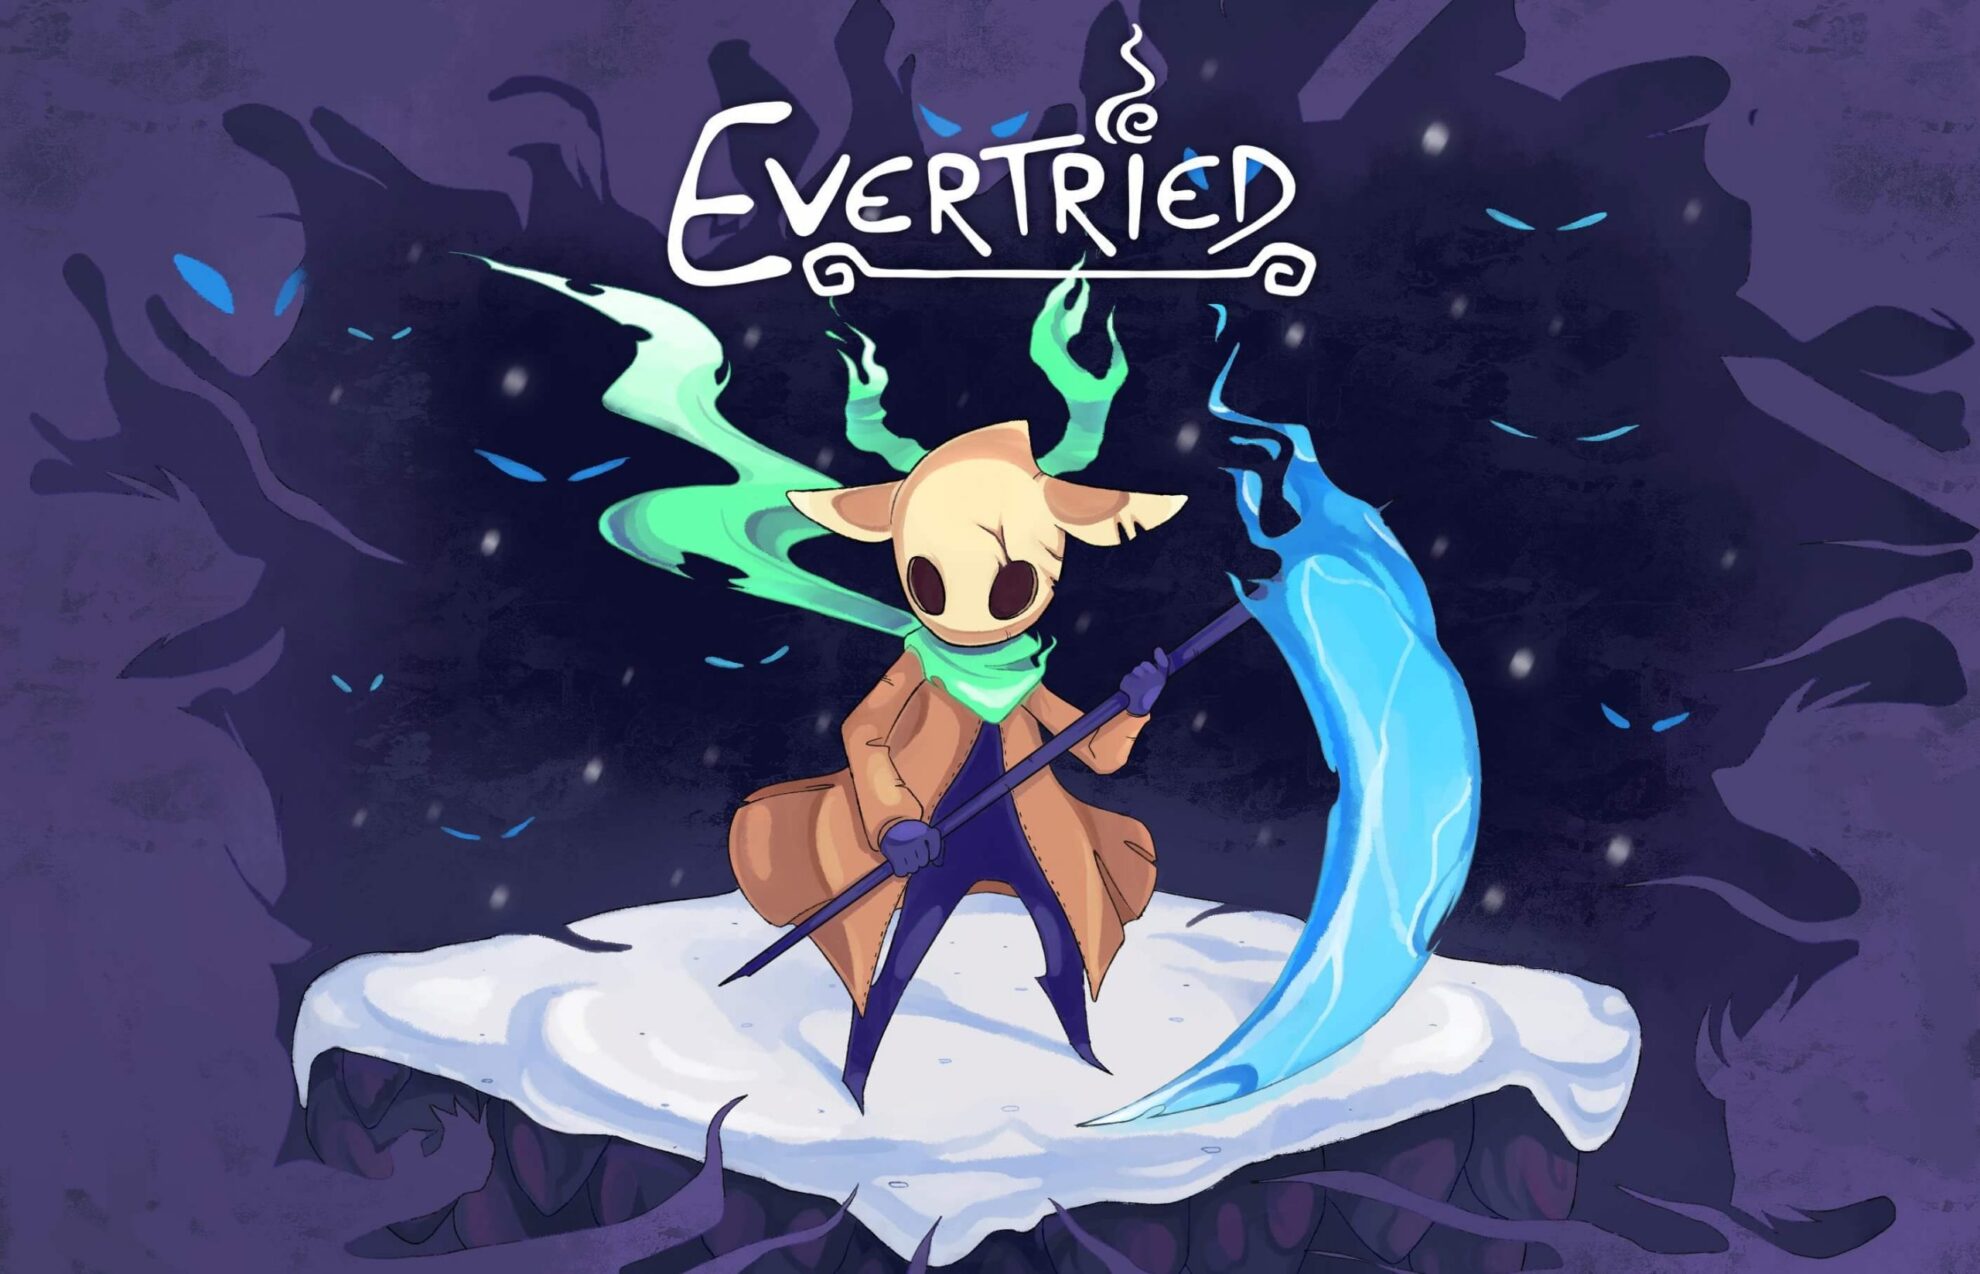 Wills to try games. EVERSOUL игра. Ever tried игра. Just Shapes and Beats. Ai roguelite.